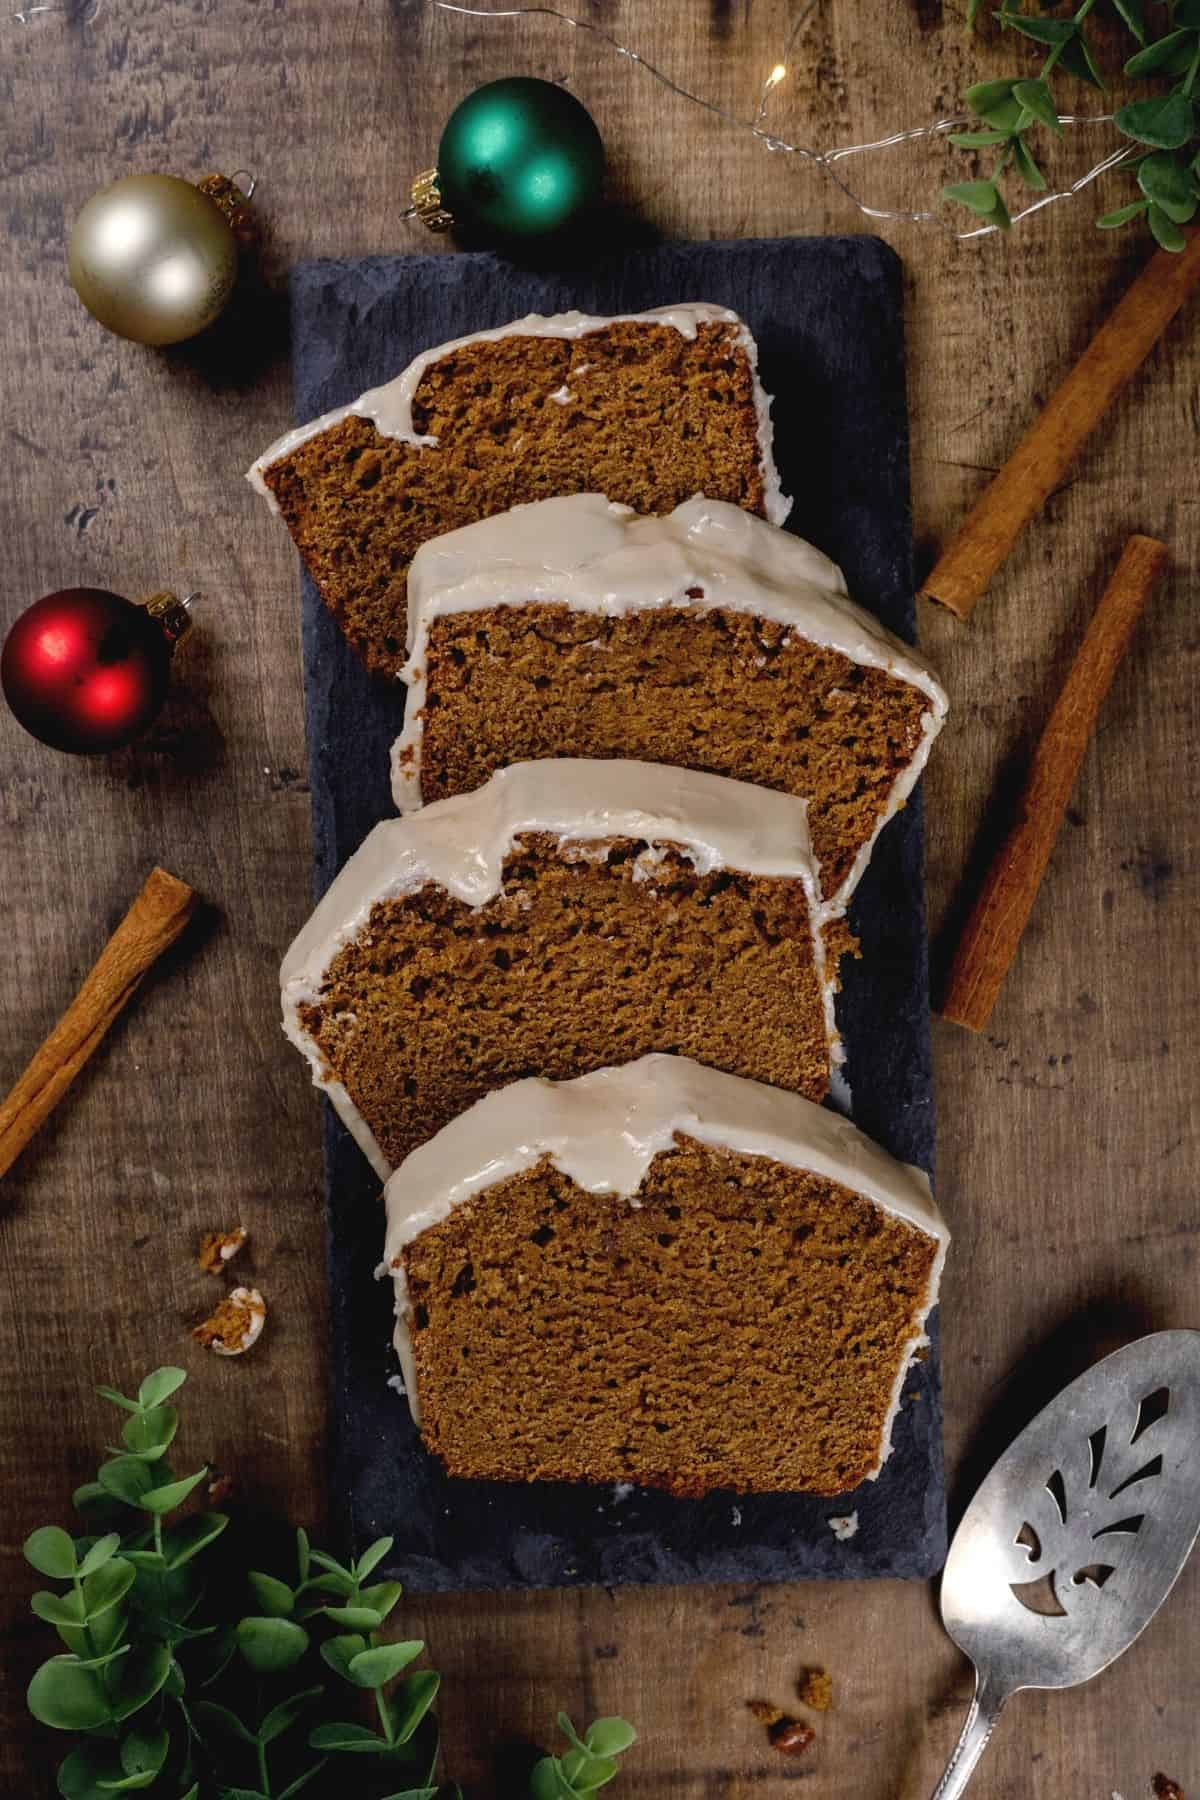 4 slices of gingerbread cake on a black slate. a serving spoon is seen. cinnamon sticks and Christmas ornaments surround the cake.